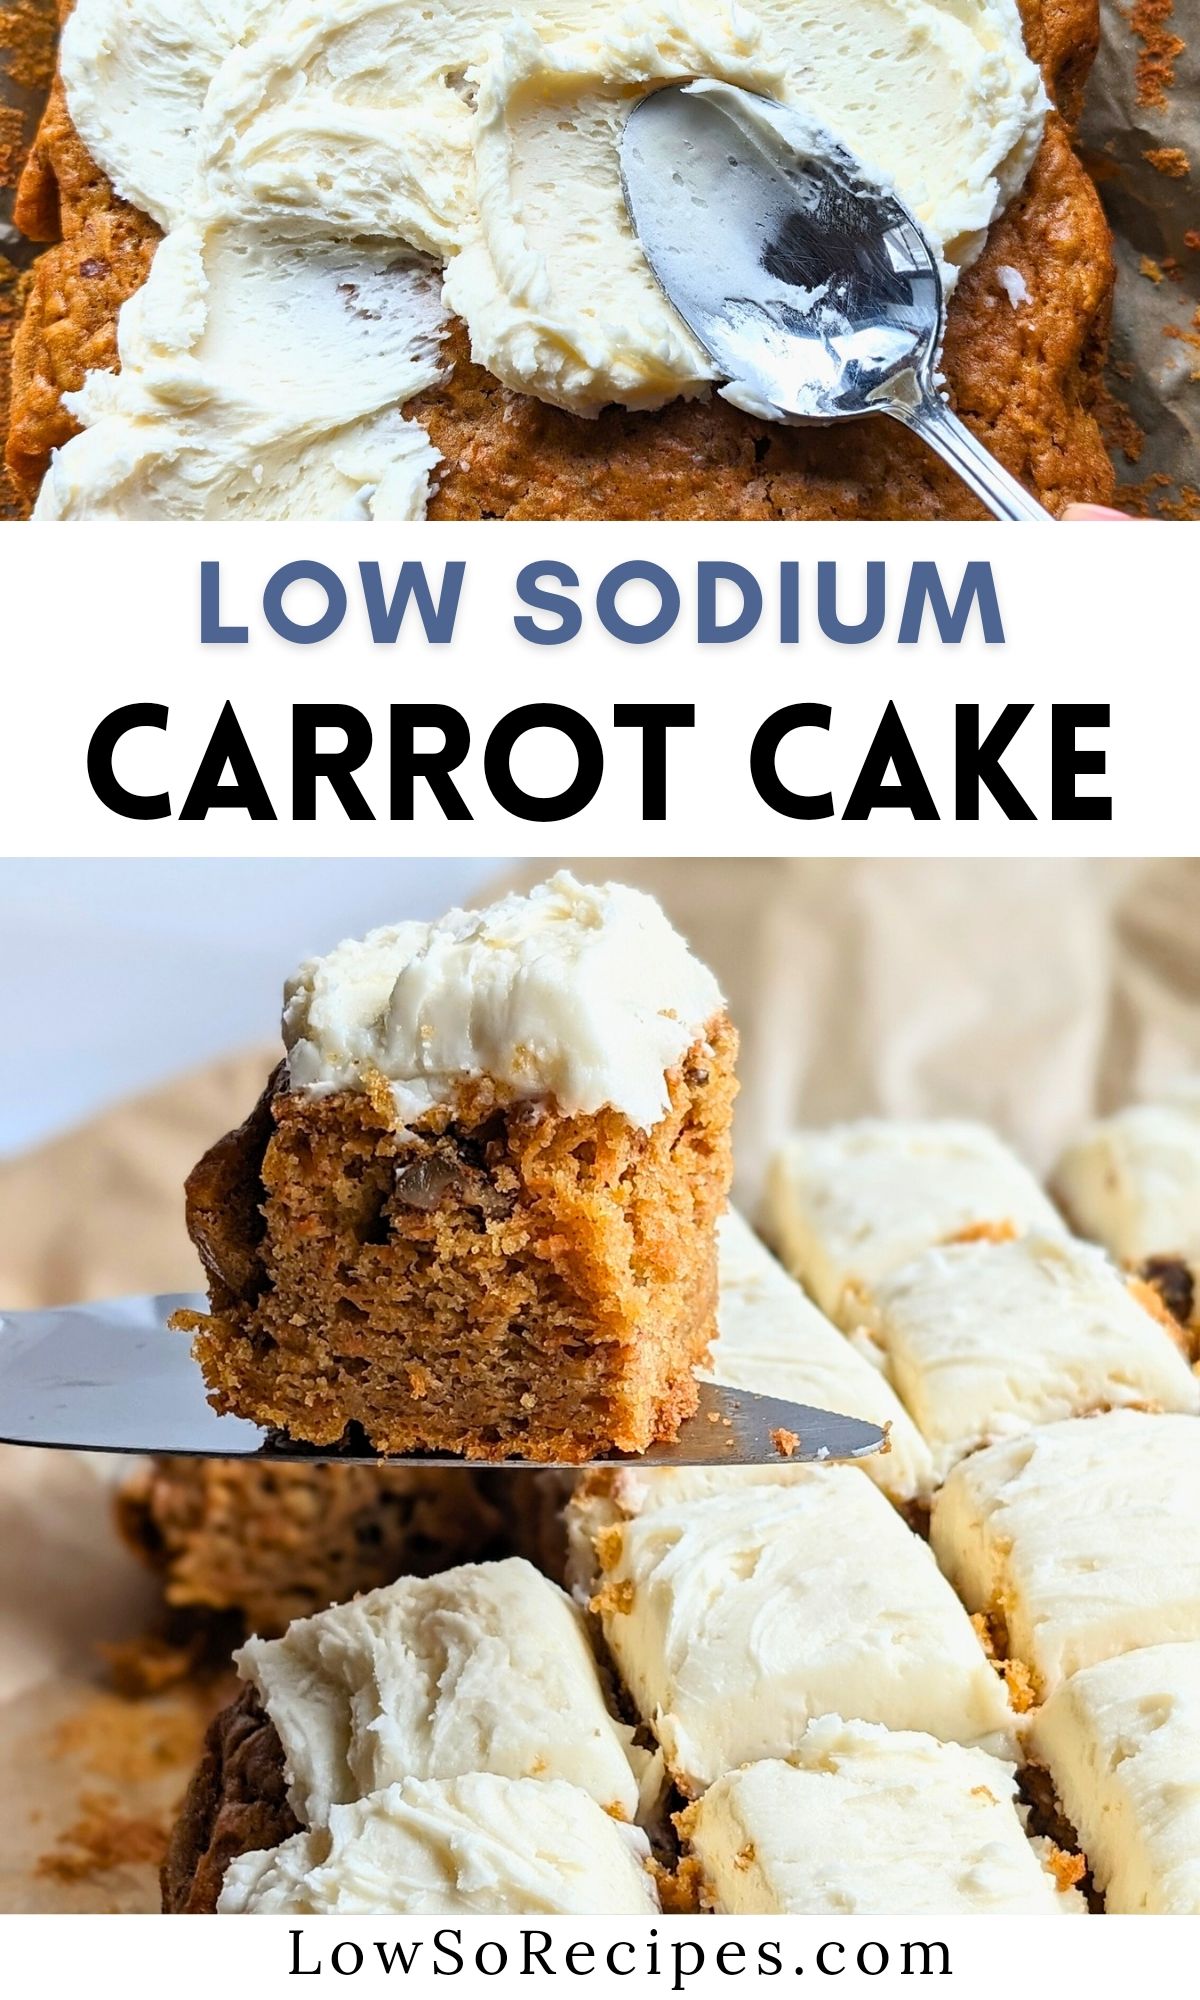 low sodium carrot cake recipe easy low sodium baking ideas and desserts without salt